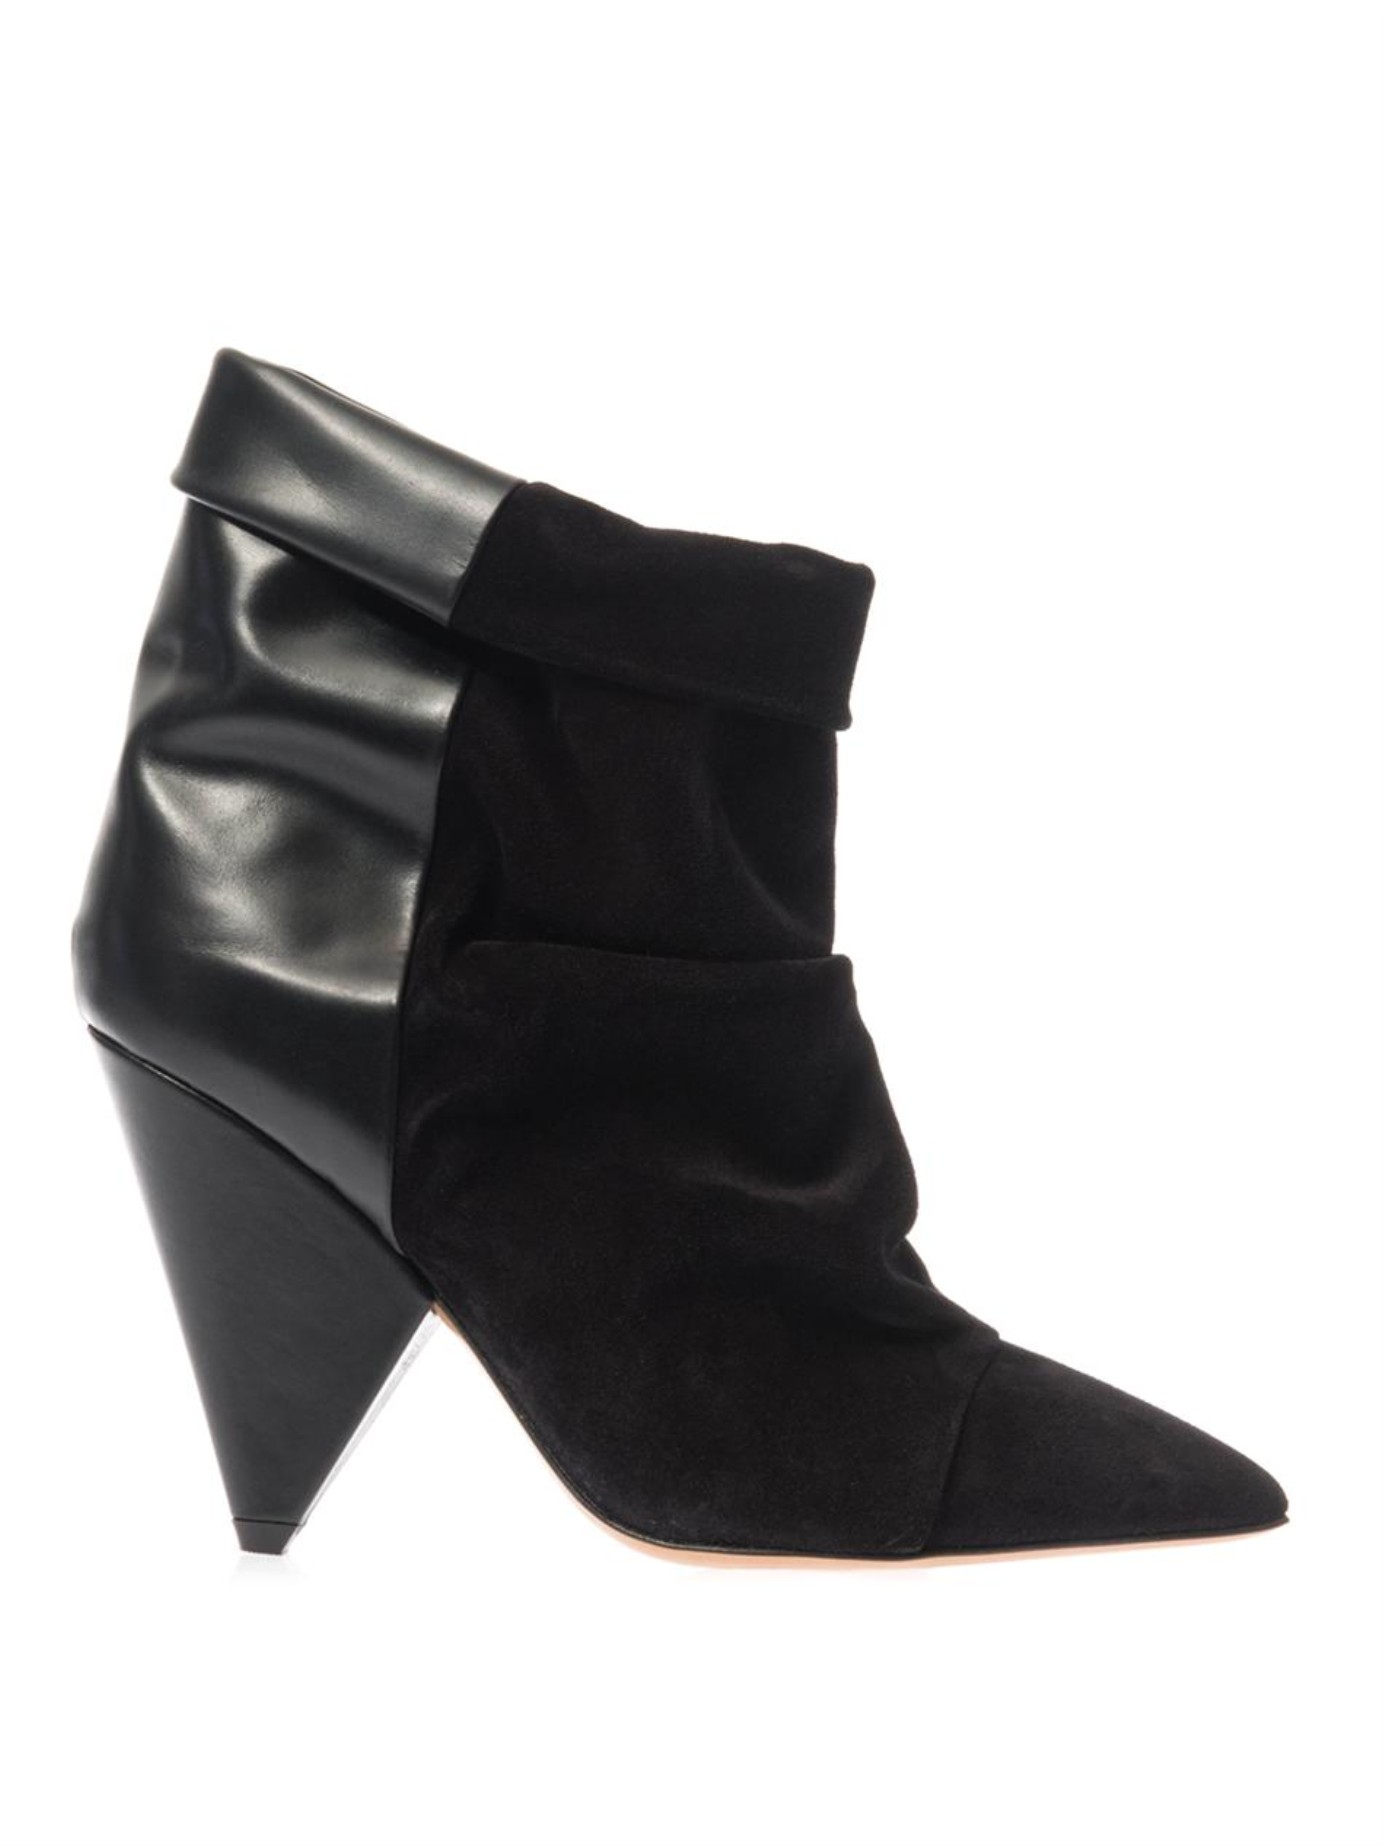 Isabel Marant Andrew Suede Leather Boots in Black - Lyst